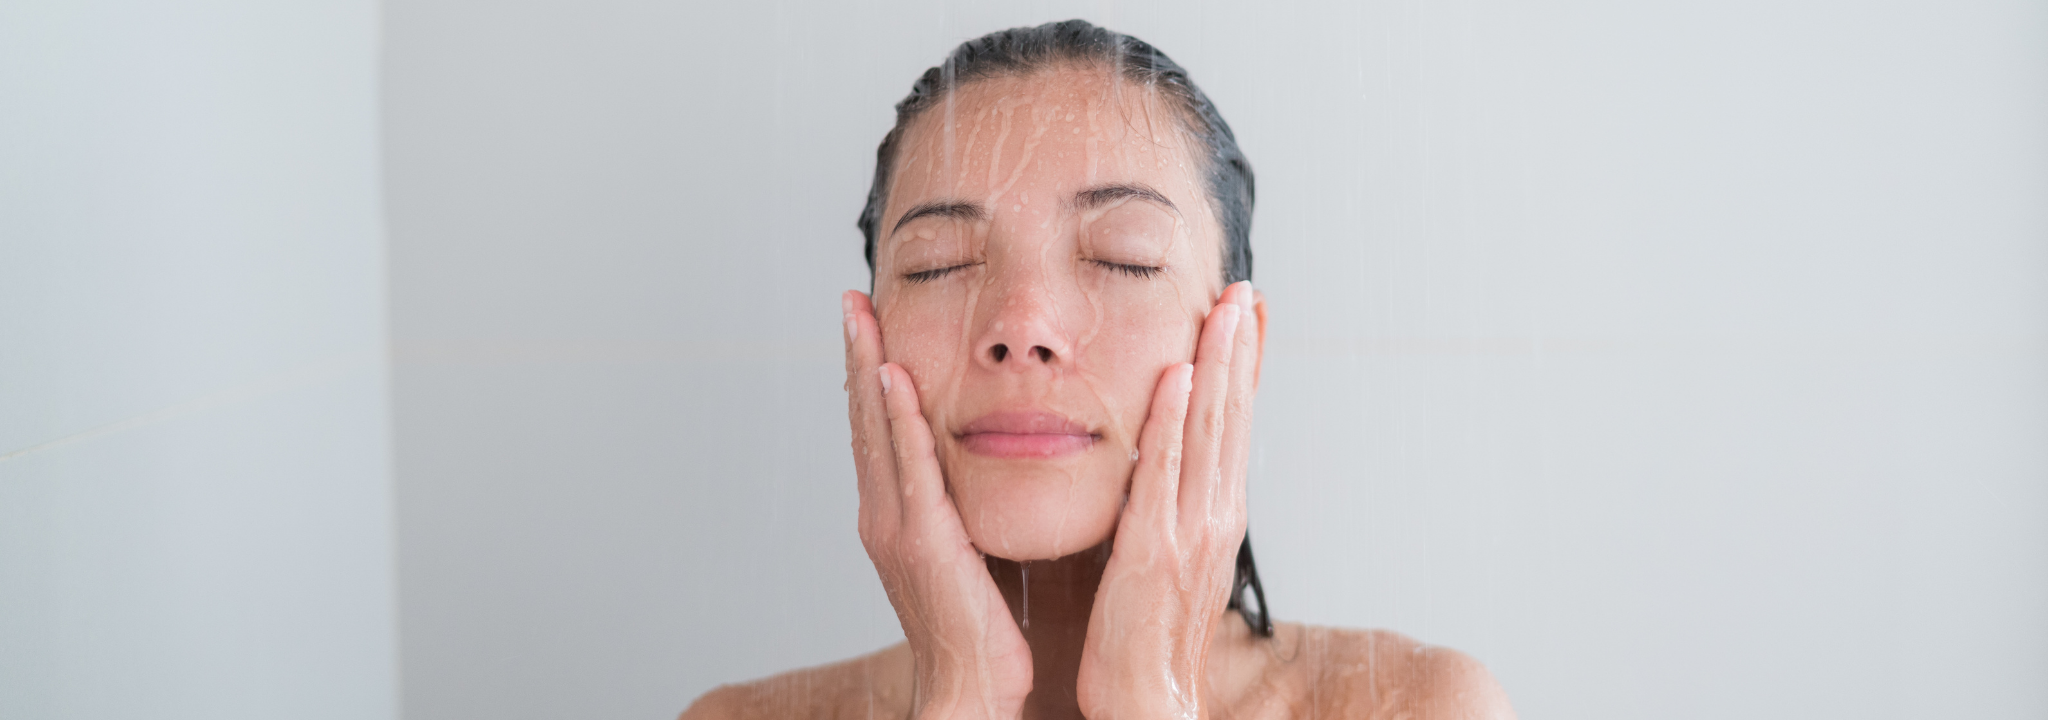 60 Seconds to Improve Your Skin!